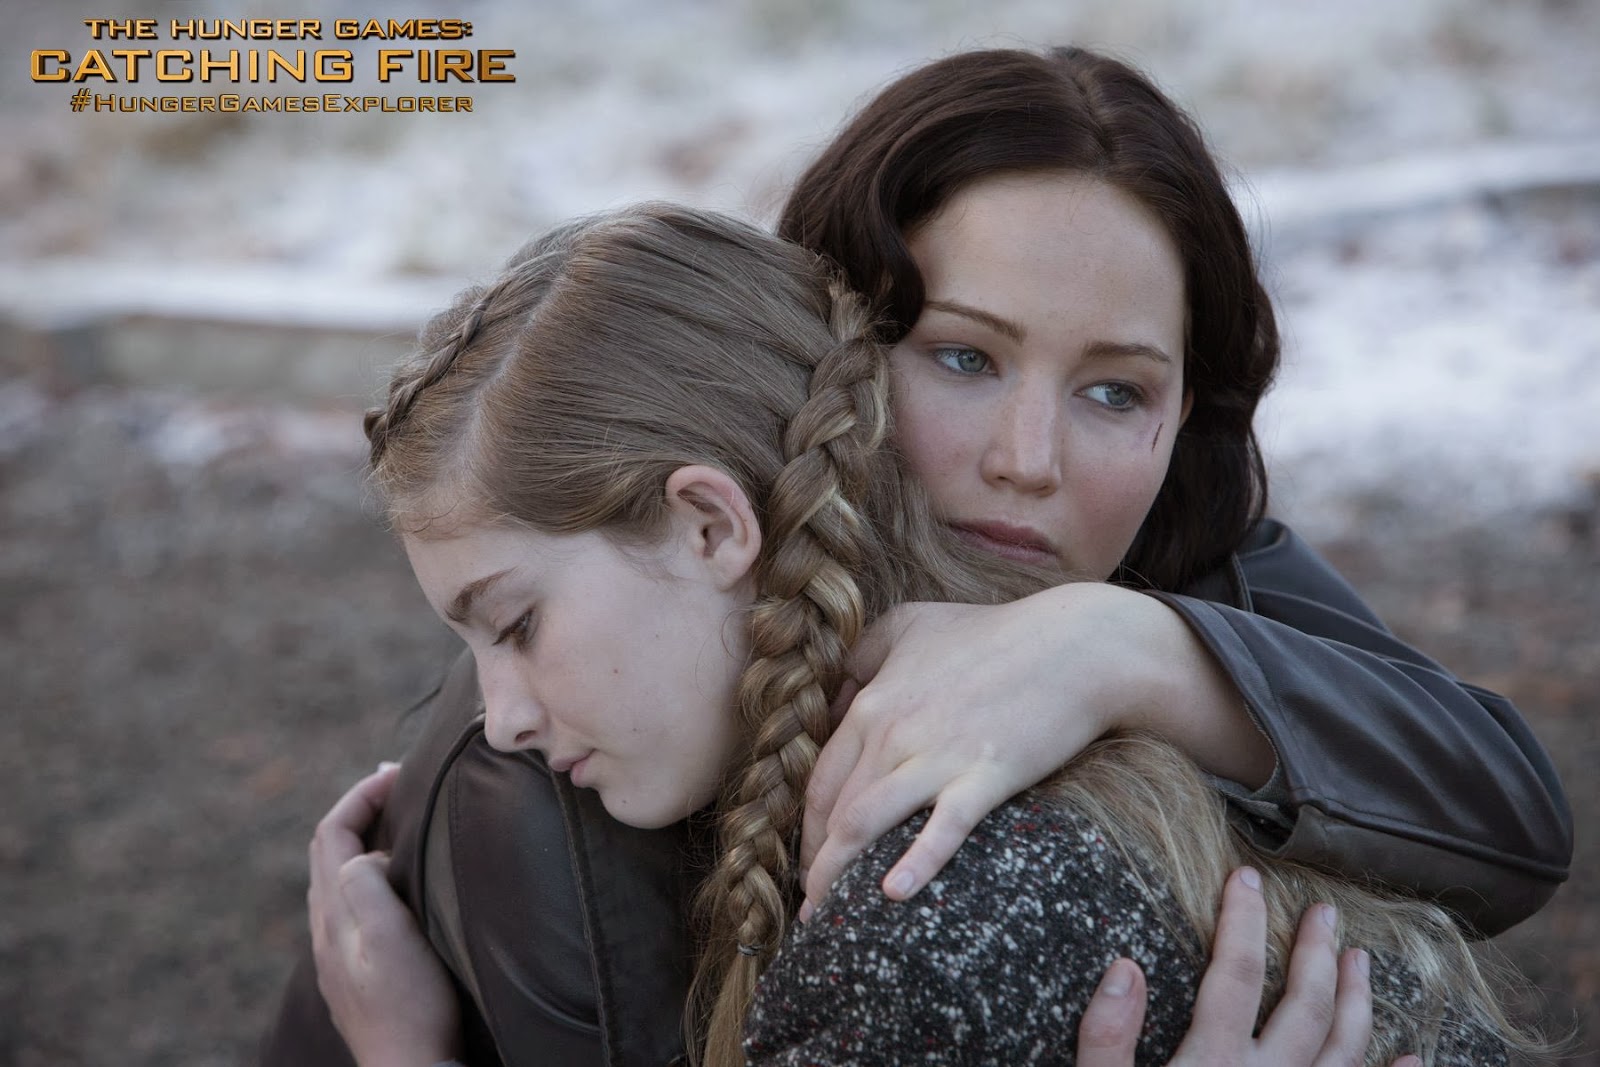 THE HUNGER GAMES - Movieguide